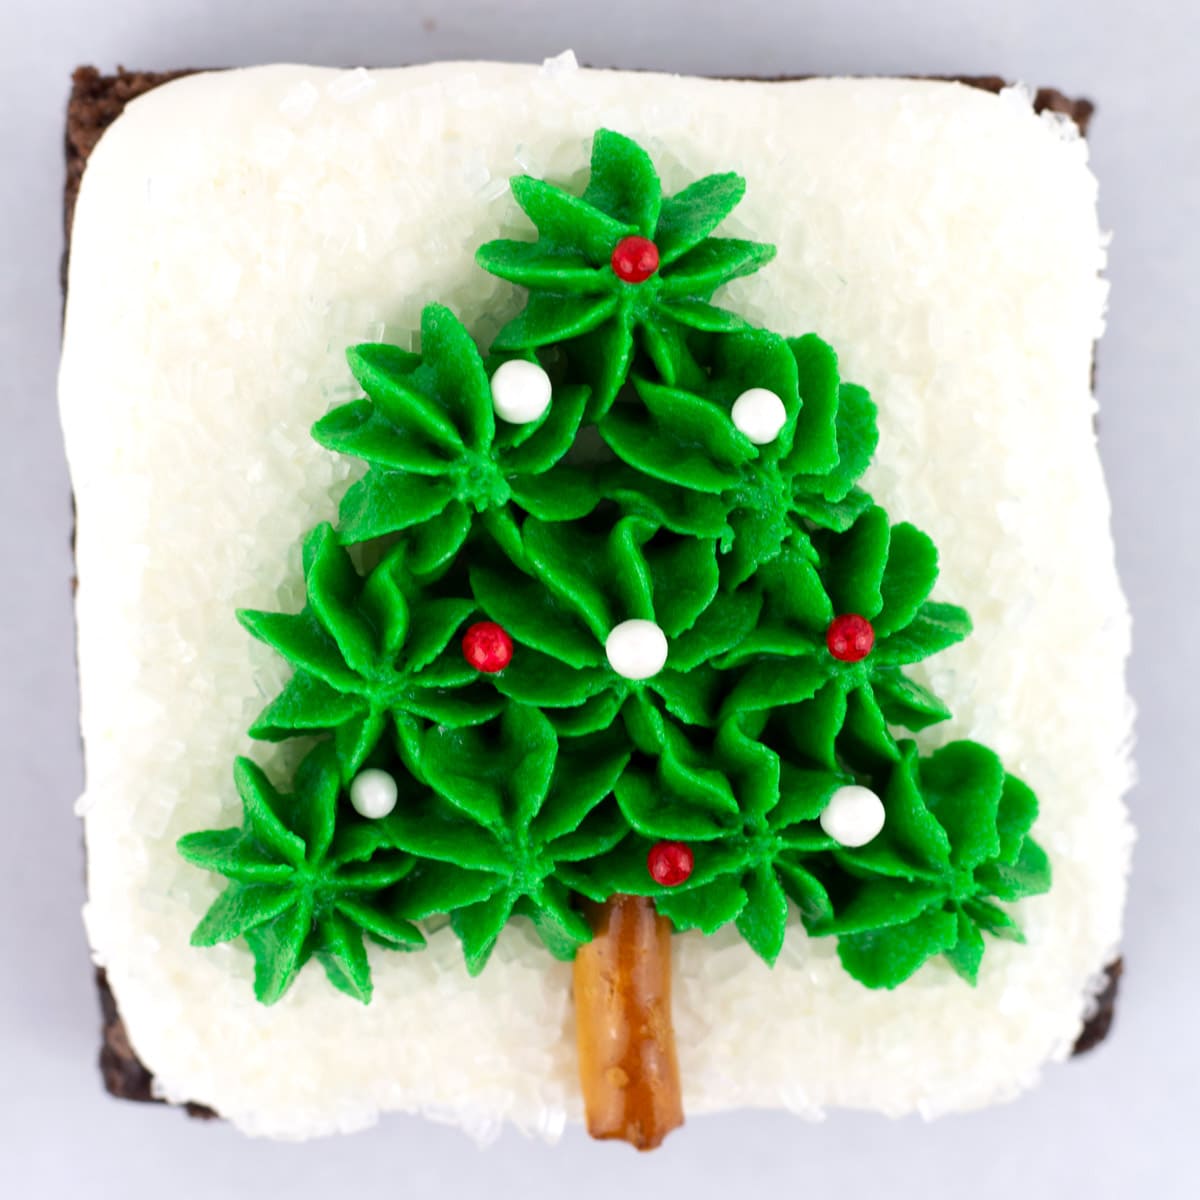 A square brownie decorated with a green Christmas tree and red and white sprinkles.